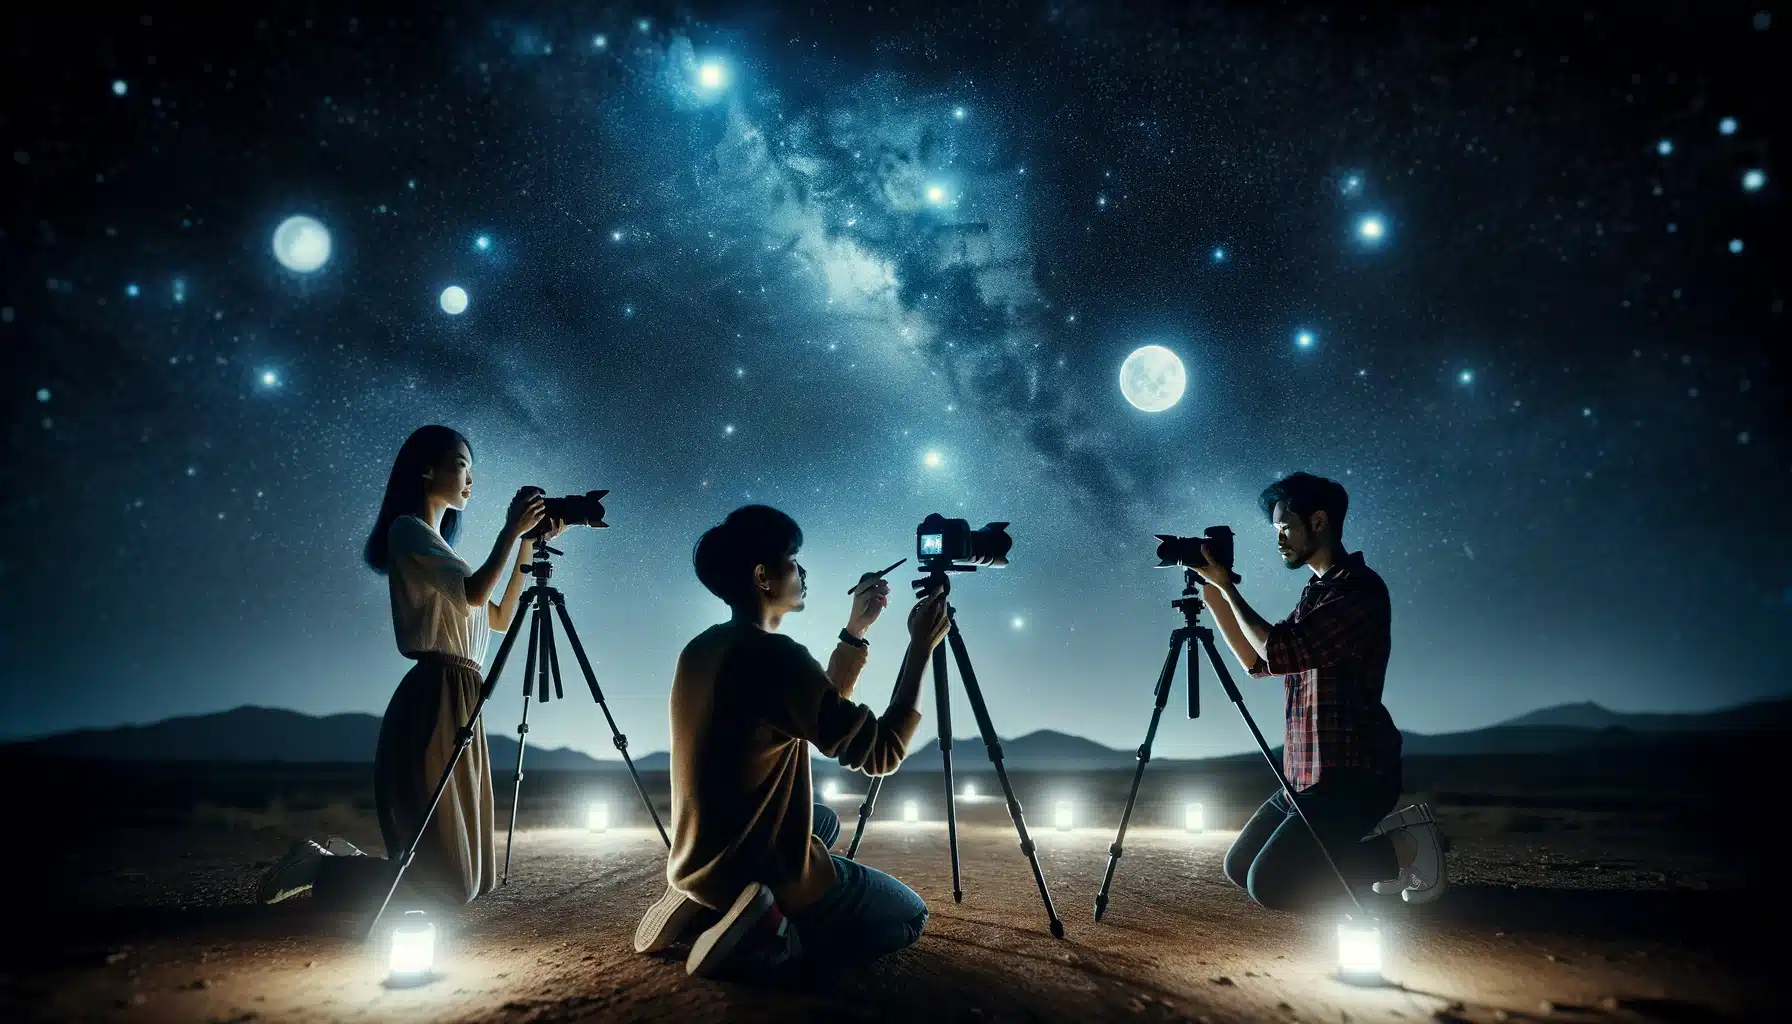 Three photographers— an Asian male, a Hispanic female, and a Middle Eastern male—set up tripods and cameras under a star-lit night sky, each capturing their own self-portraits, demonstrating diverse techniques and personal artistic expressions in a serene, remote setting.